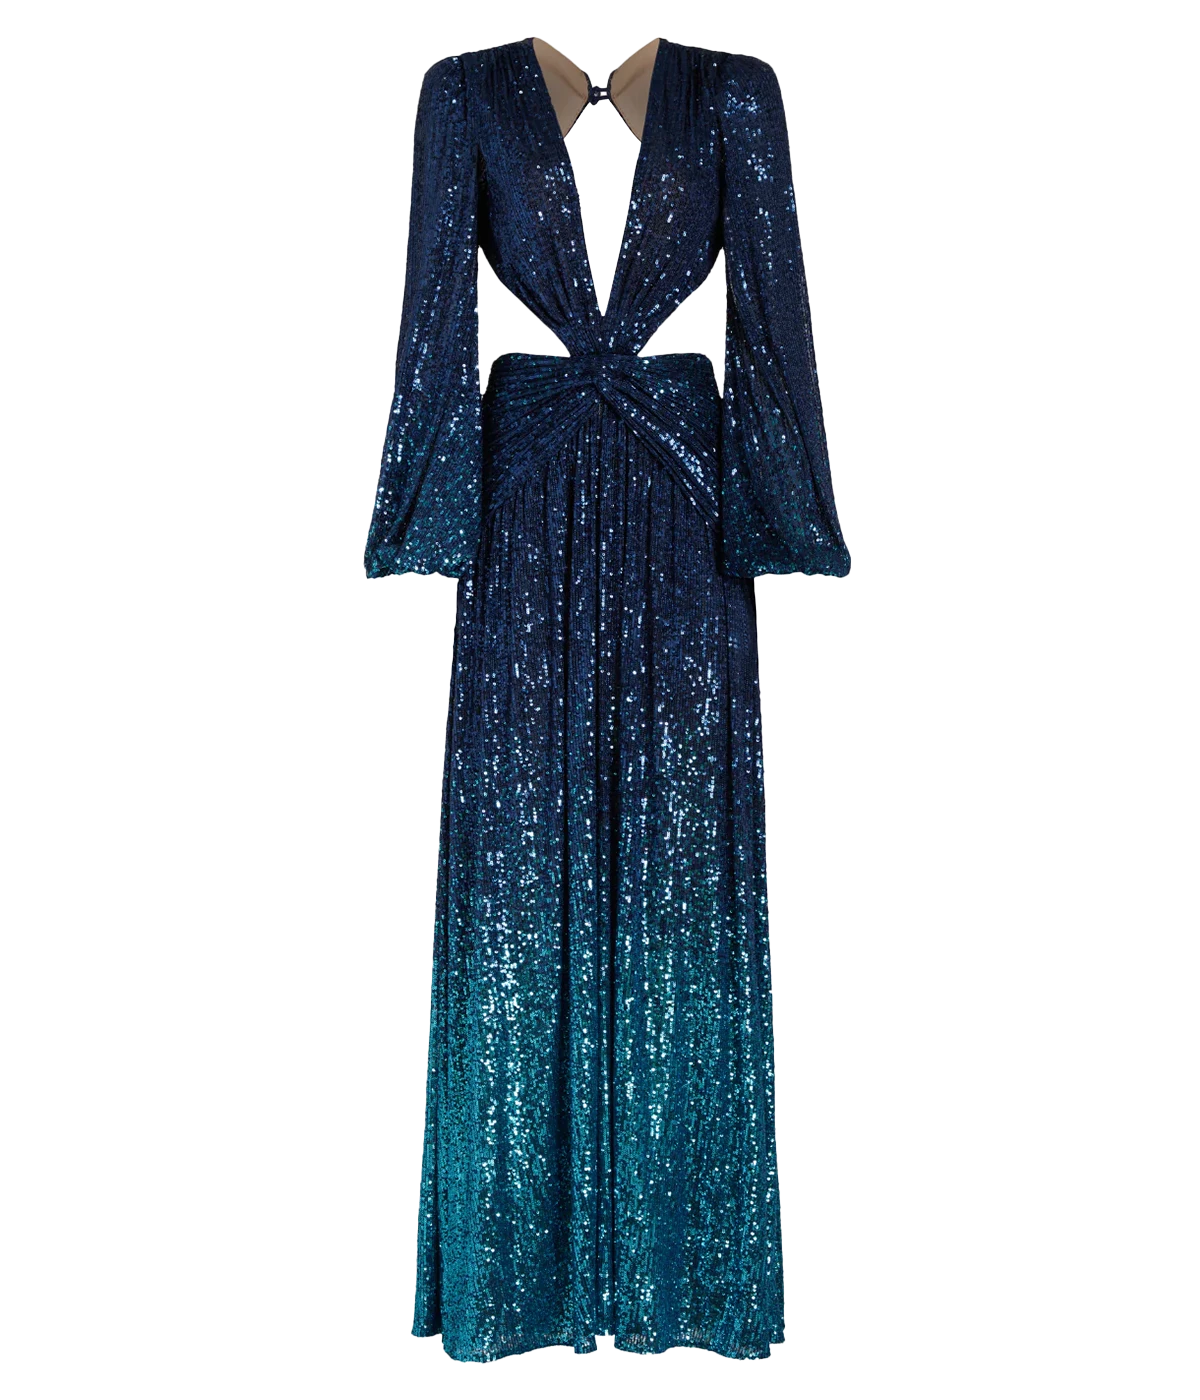 Ombre Sequin Gown in High Tide